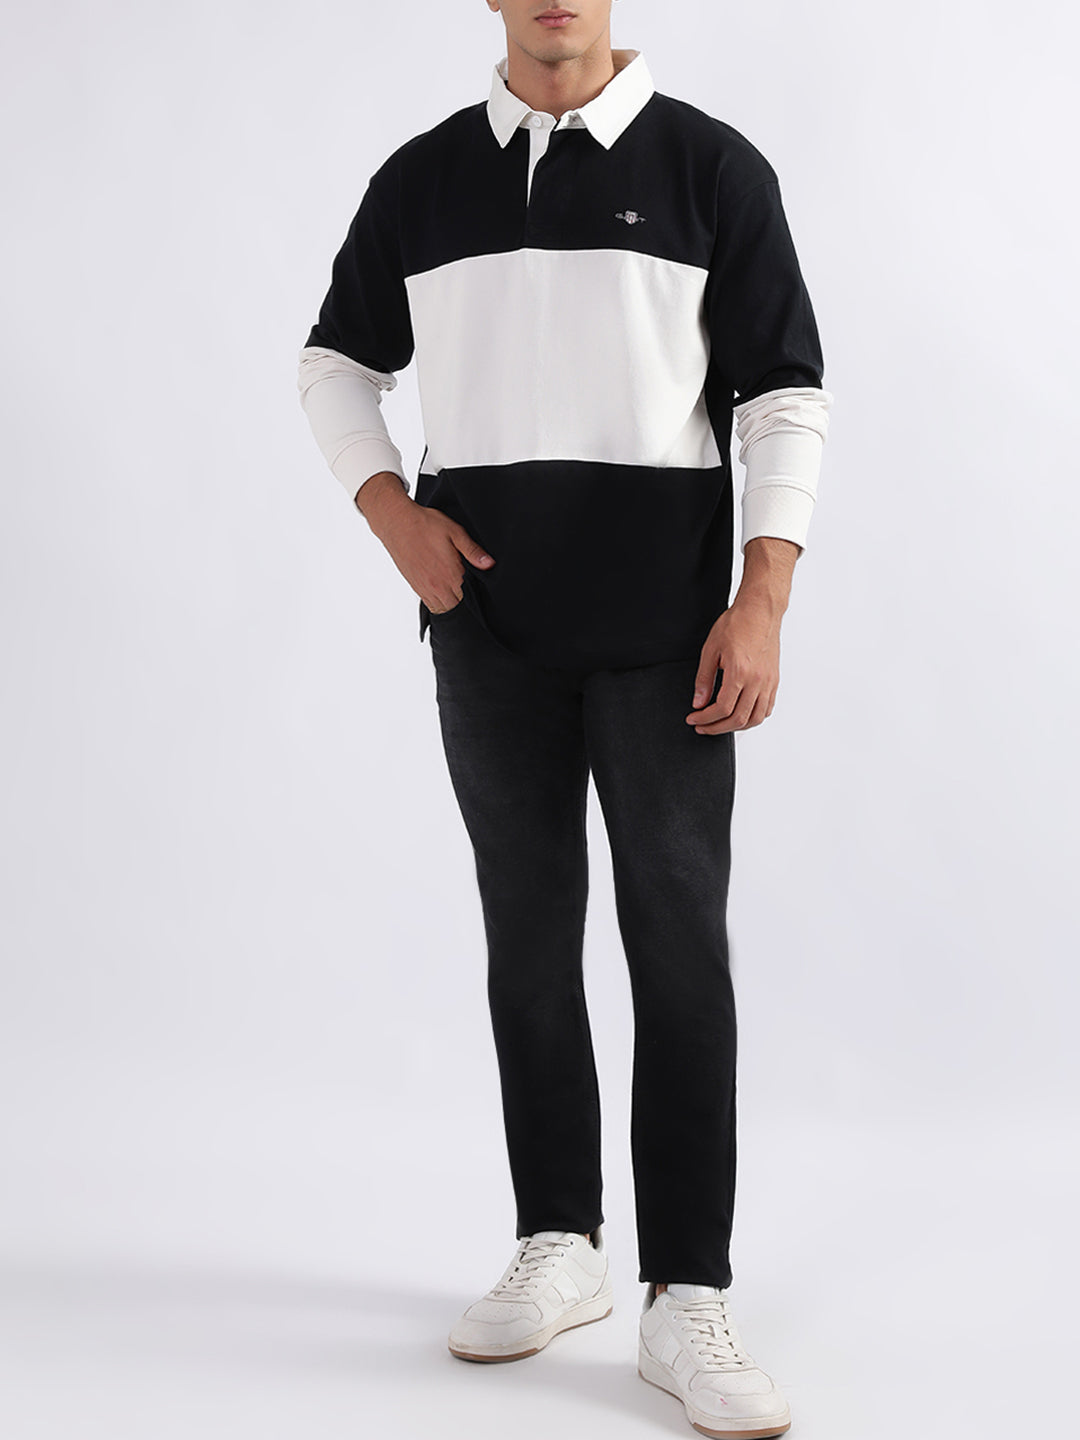 Gant Black & White Relaxed Fit Polo T-Shirt